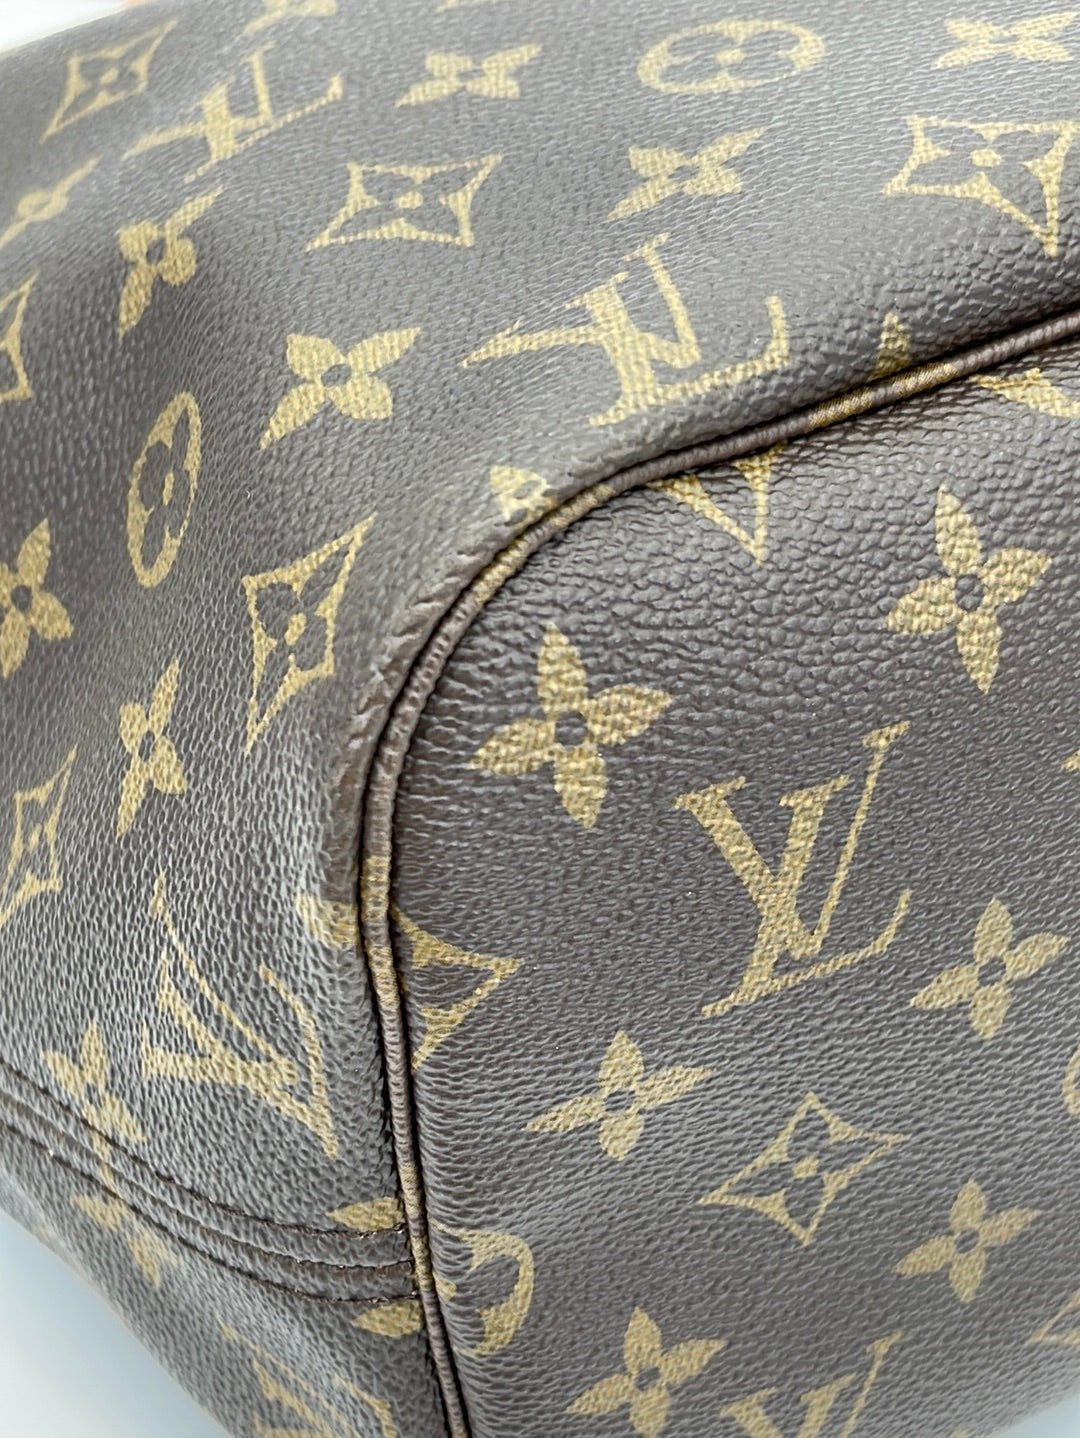 Louis Vuitton Neverfull MM – Preloved Luxe